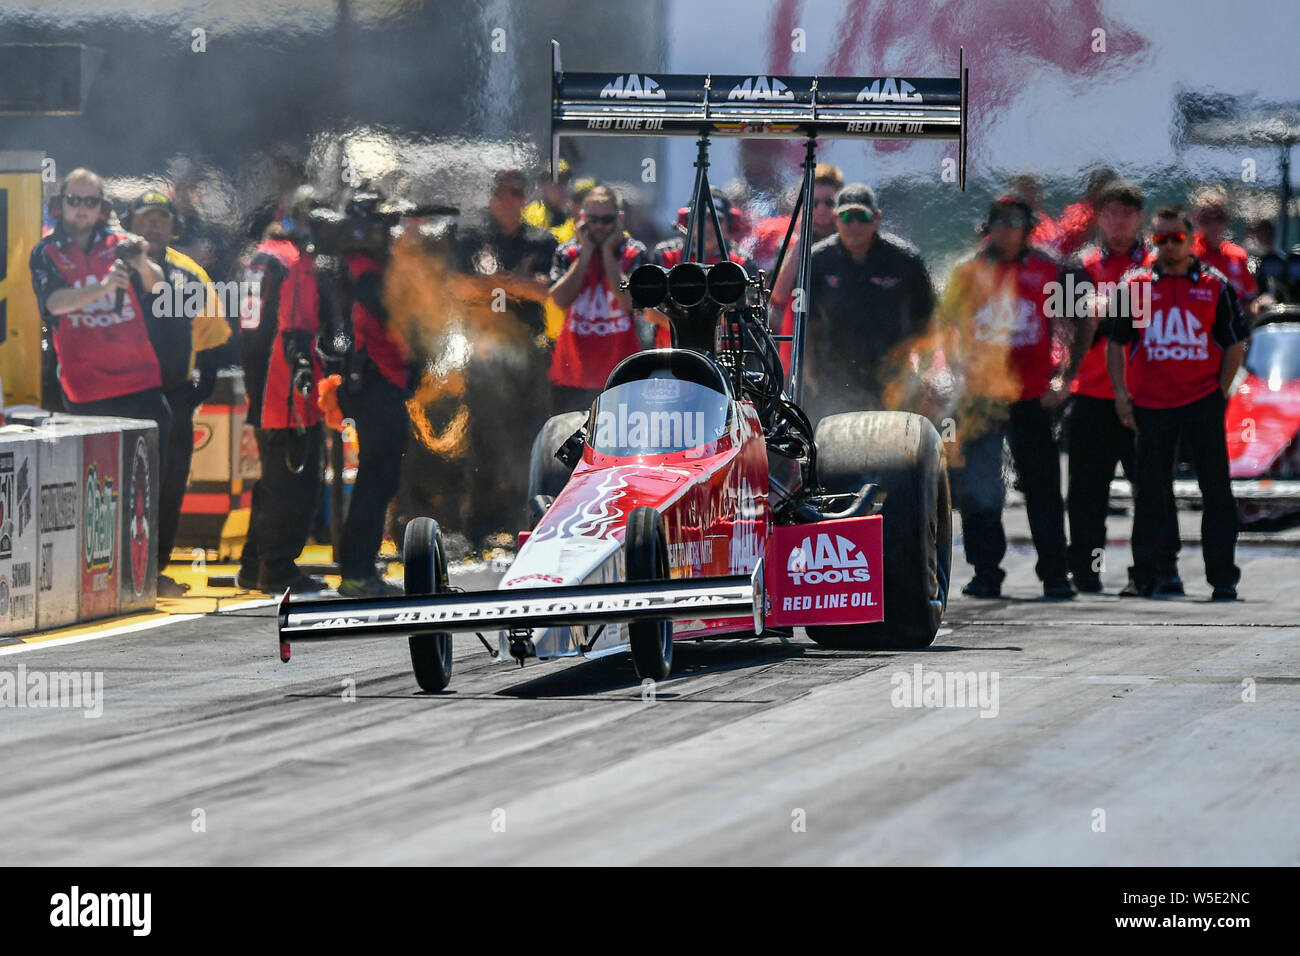 Sonoma, California, USA. 28th July, 2019. Doug Kalitta launches his top fuel dragster during the NHRA Sonoma Nationals at Sonoma Raceway in Sonoma, California. Chris Brown/CSM/Alamy Live News Stock Photo